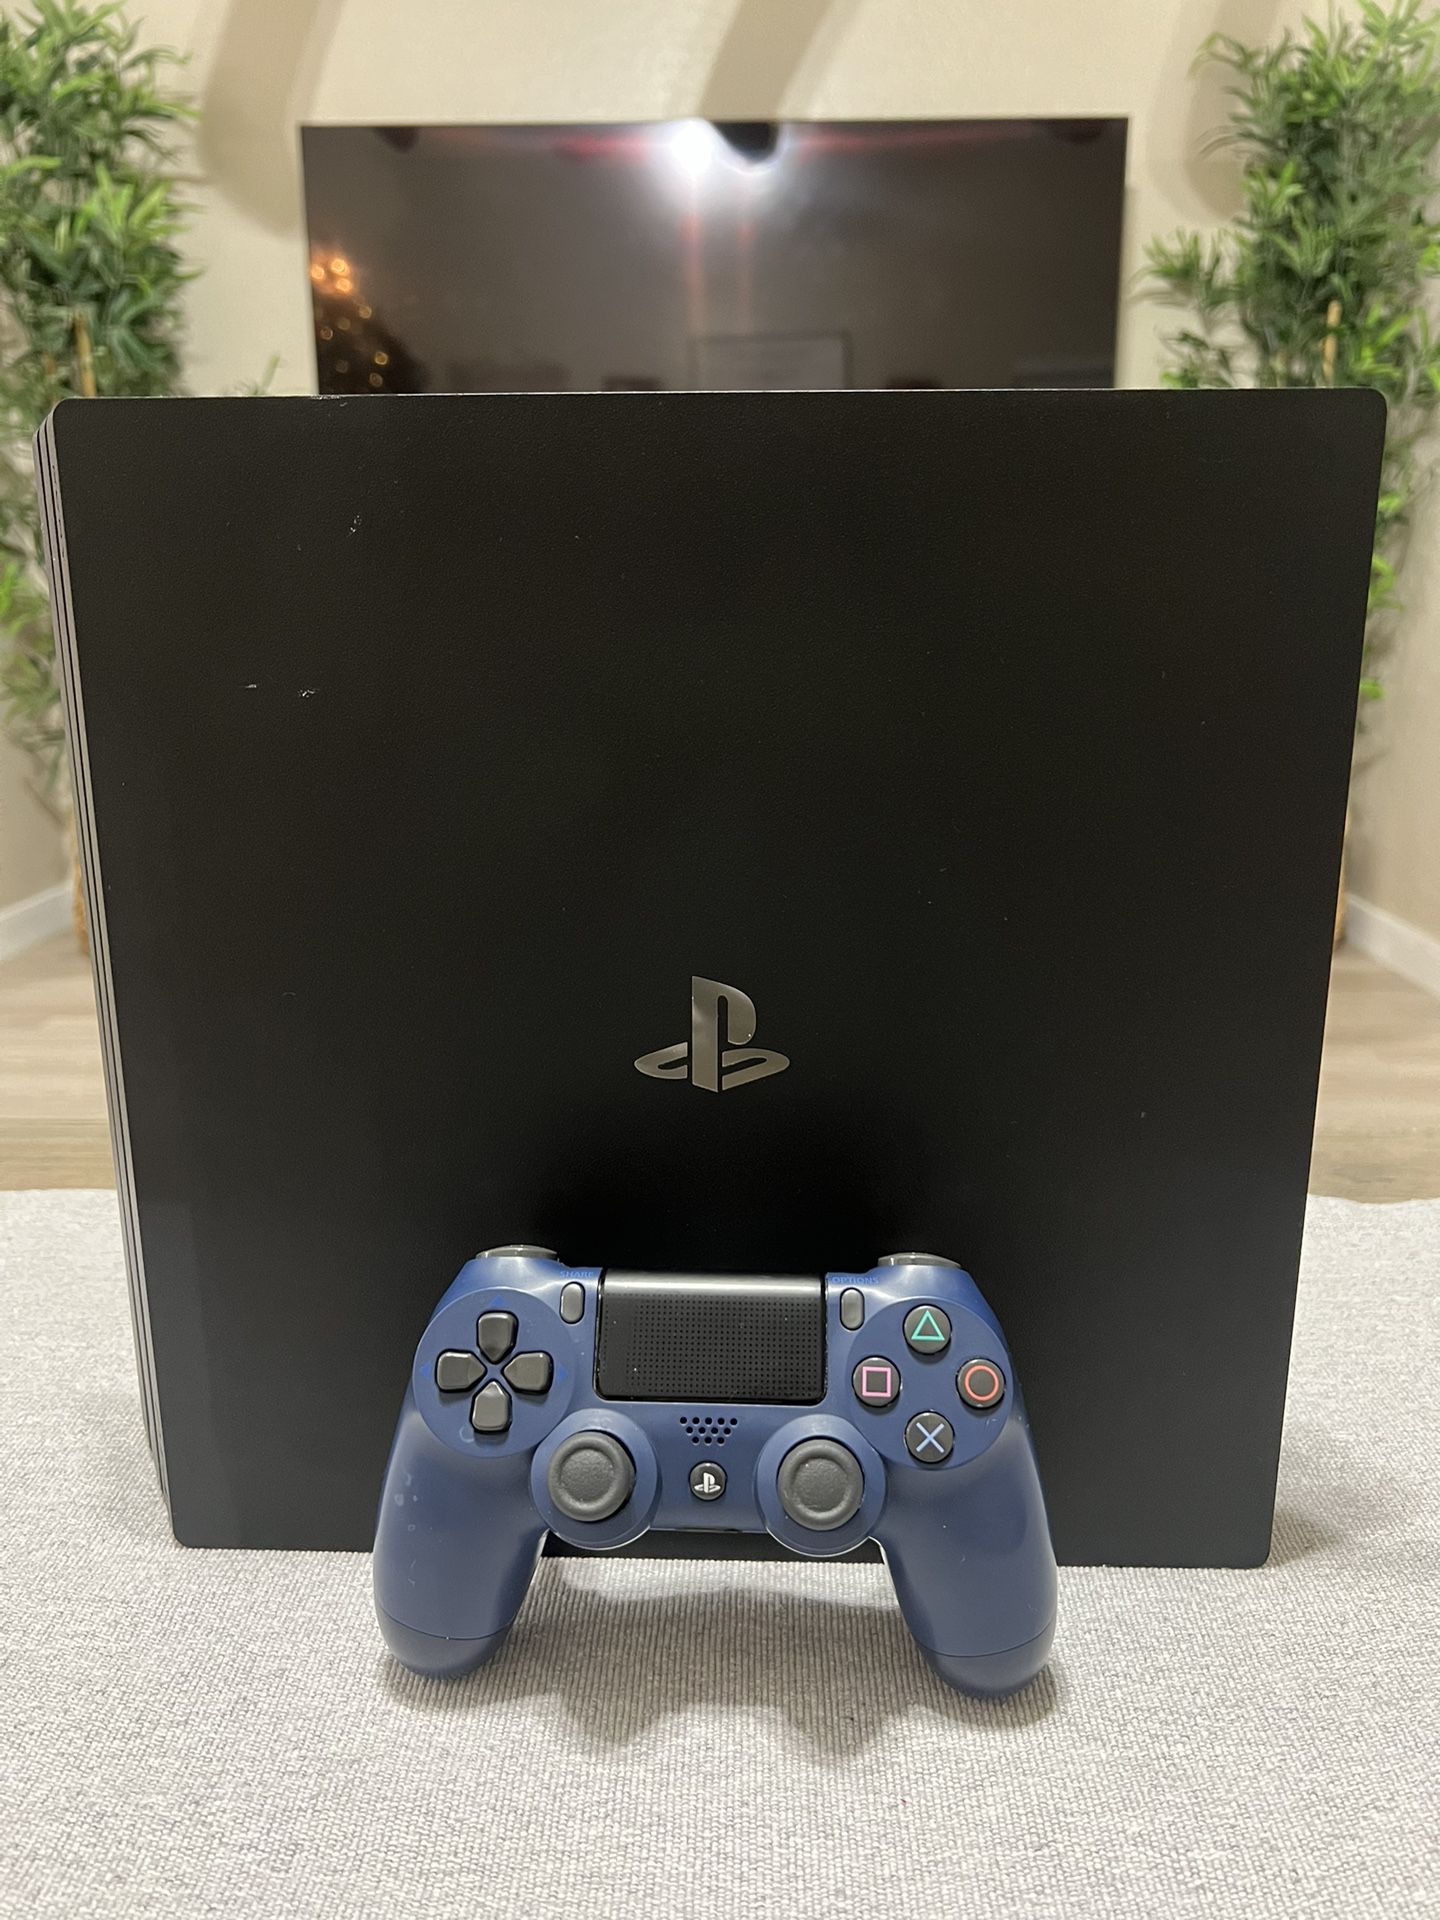 PlayStation 4 Pro Black 1TB Console with Navy Blue Sony PS4 Controller